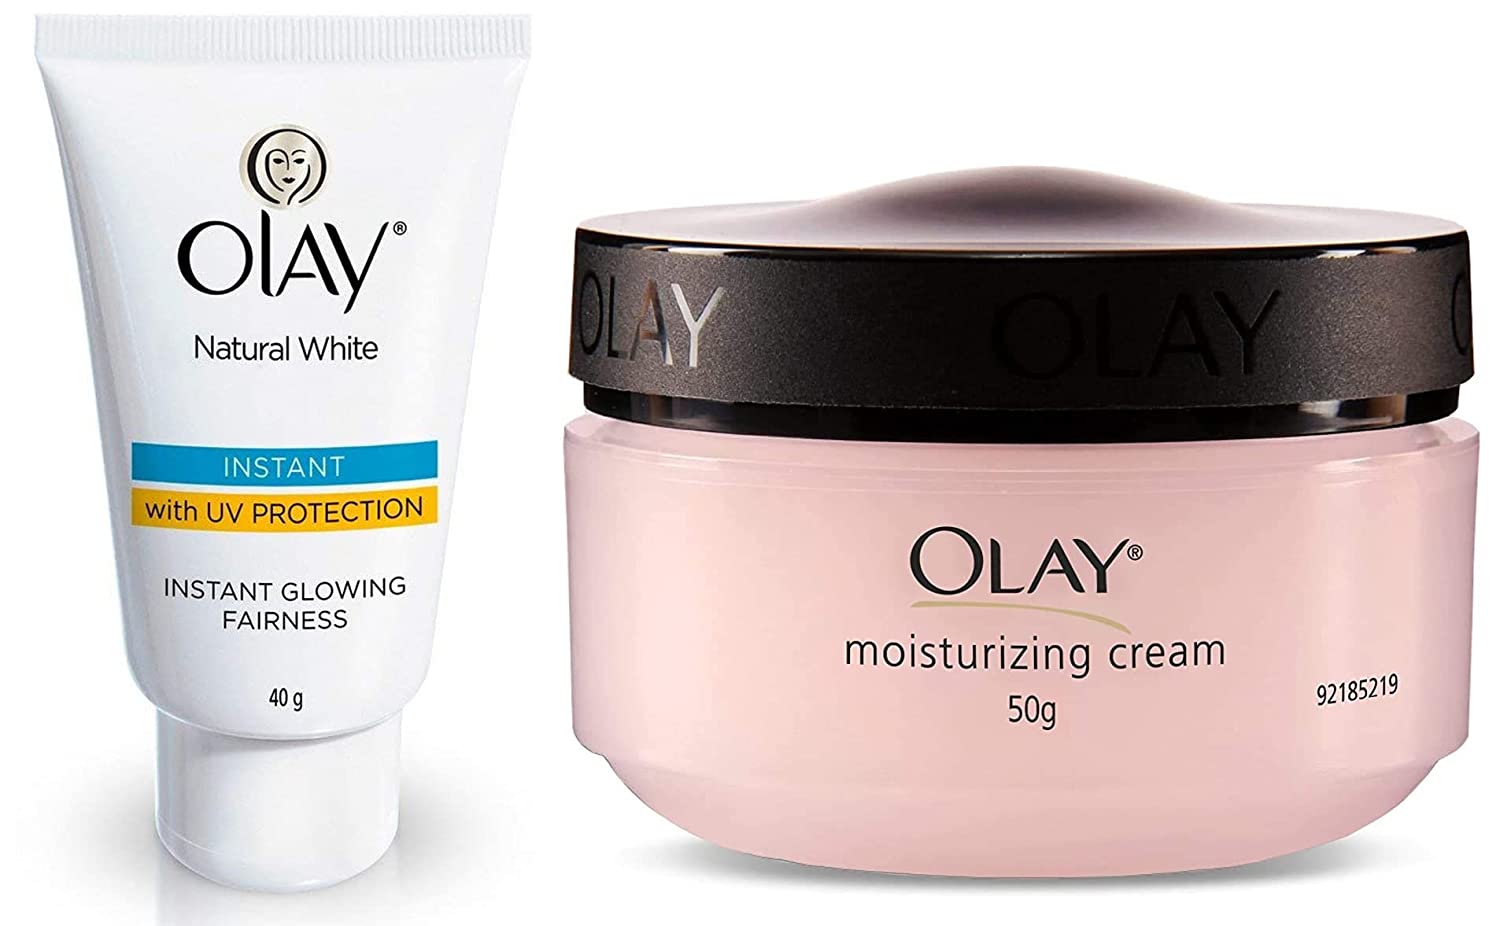 Olay natural white light instant glowing fairness cream